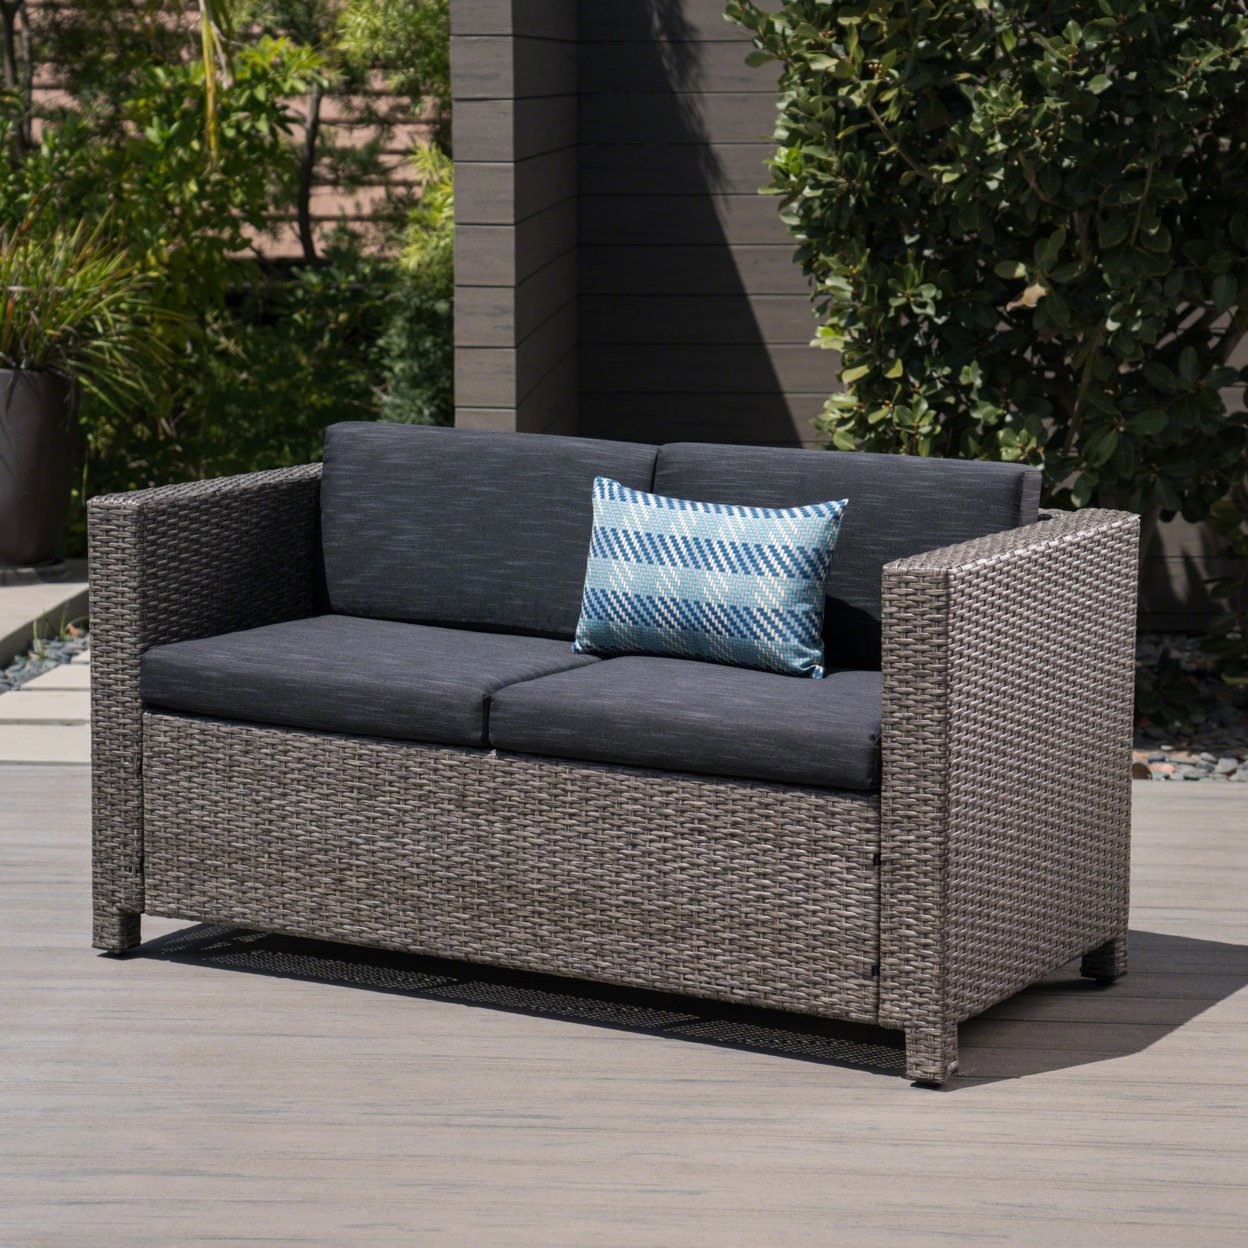 Lorelei Outdoor Wicker Loveseat With Water Resistant Cushions - Gray/Mixed Black